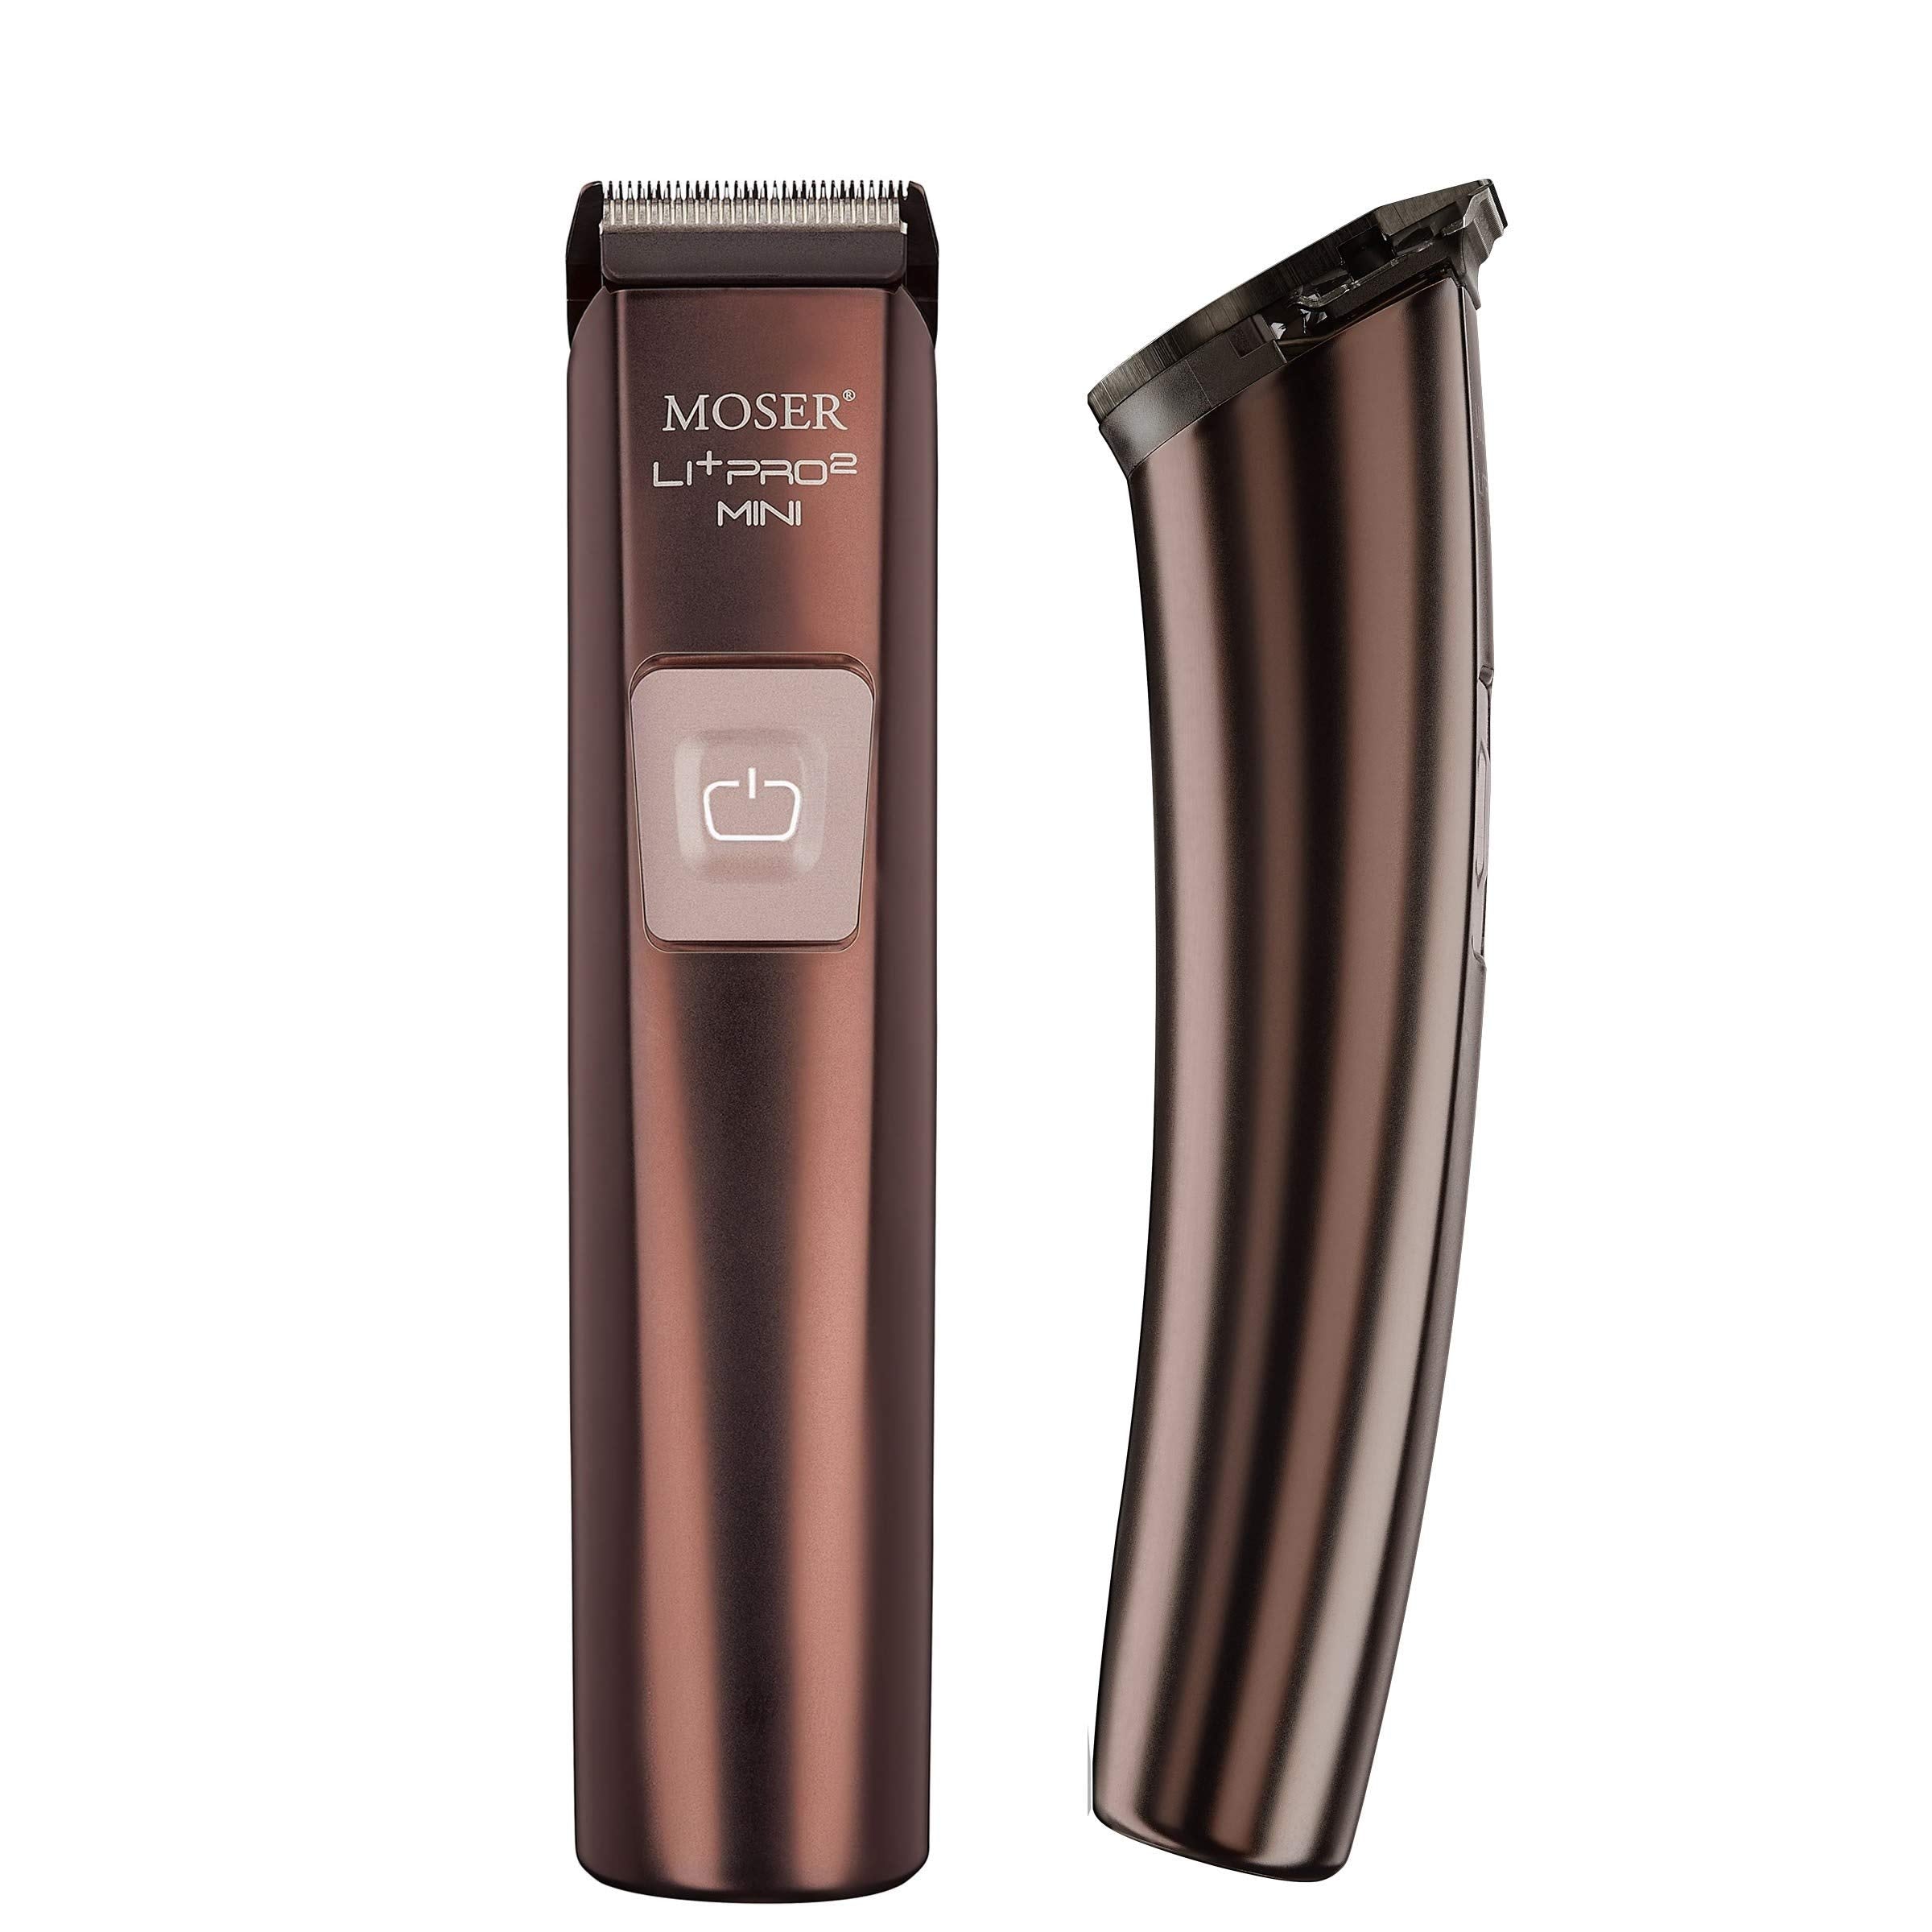 MOSER Li+Pro2 mini professional cord/cordless electric hair trimmer, 80 min quick charge, 120 minutes run time, 3-speed levels, Intelligent push button with charging stand, 1588-0151, Metallic Brown